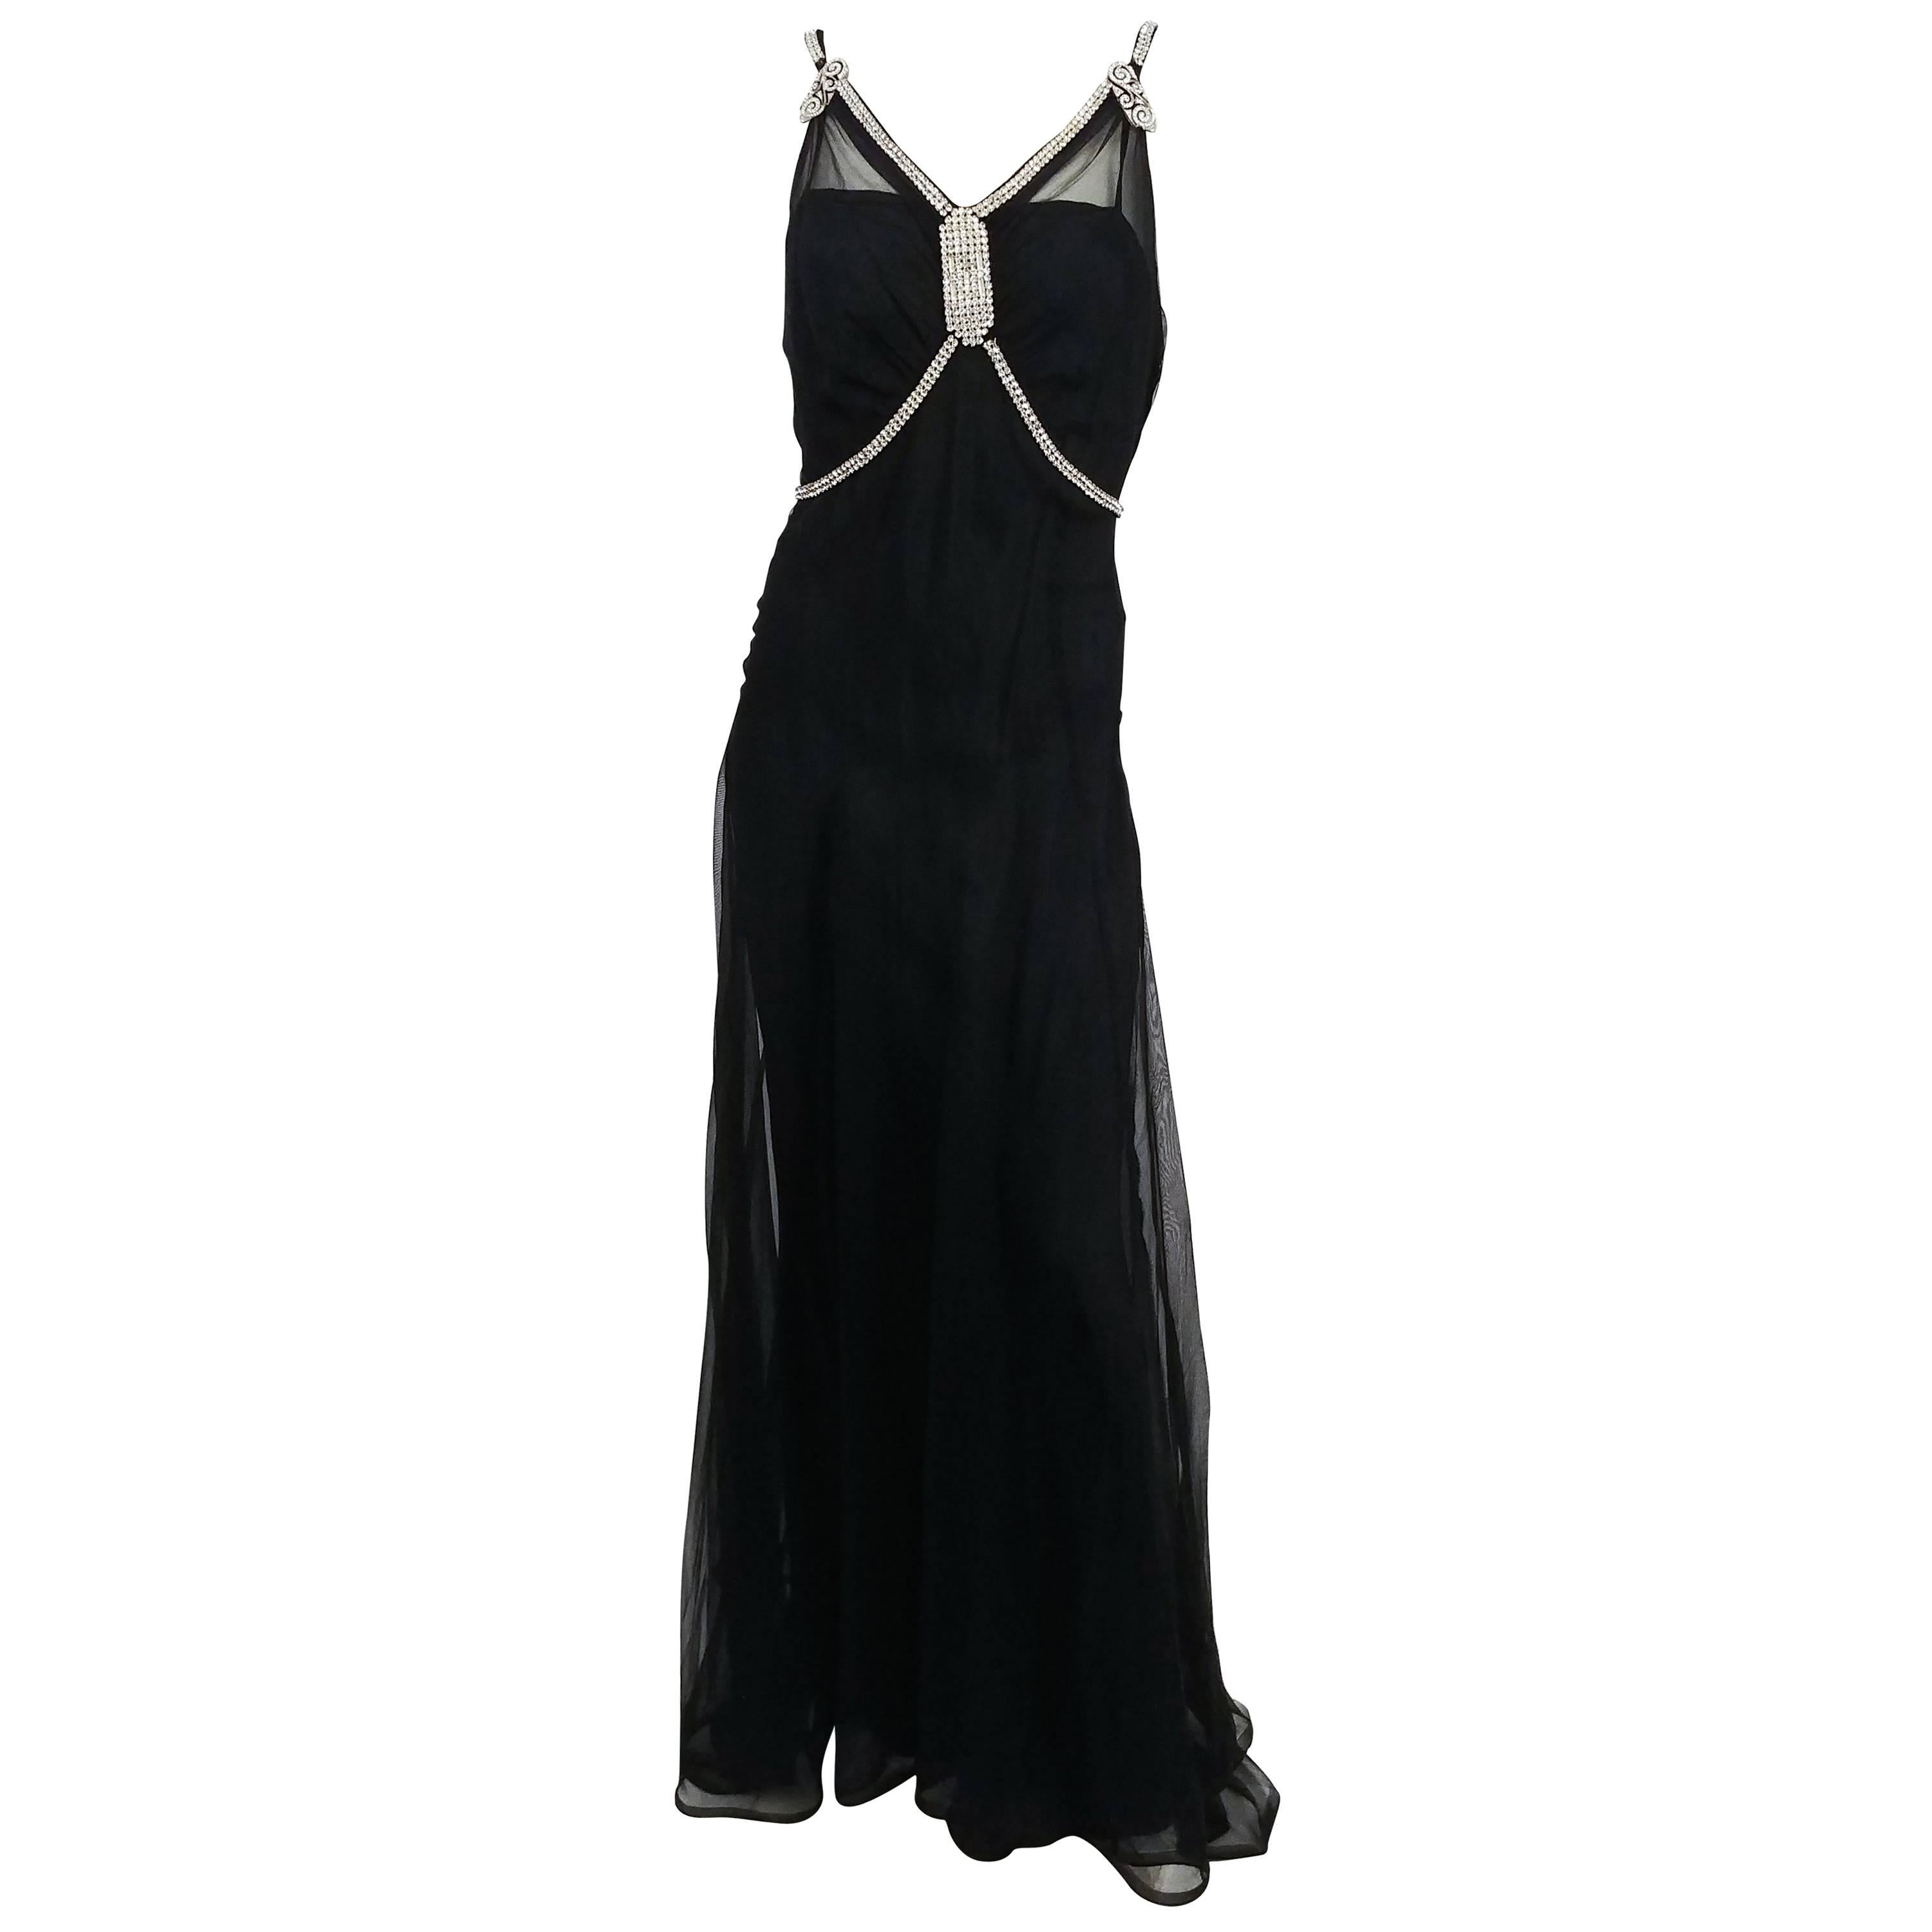 1930s Black Evening Gown with Rhinestone Detailing